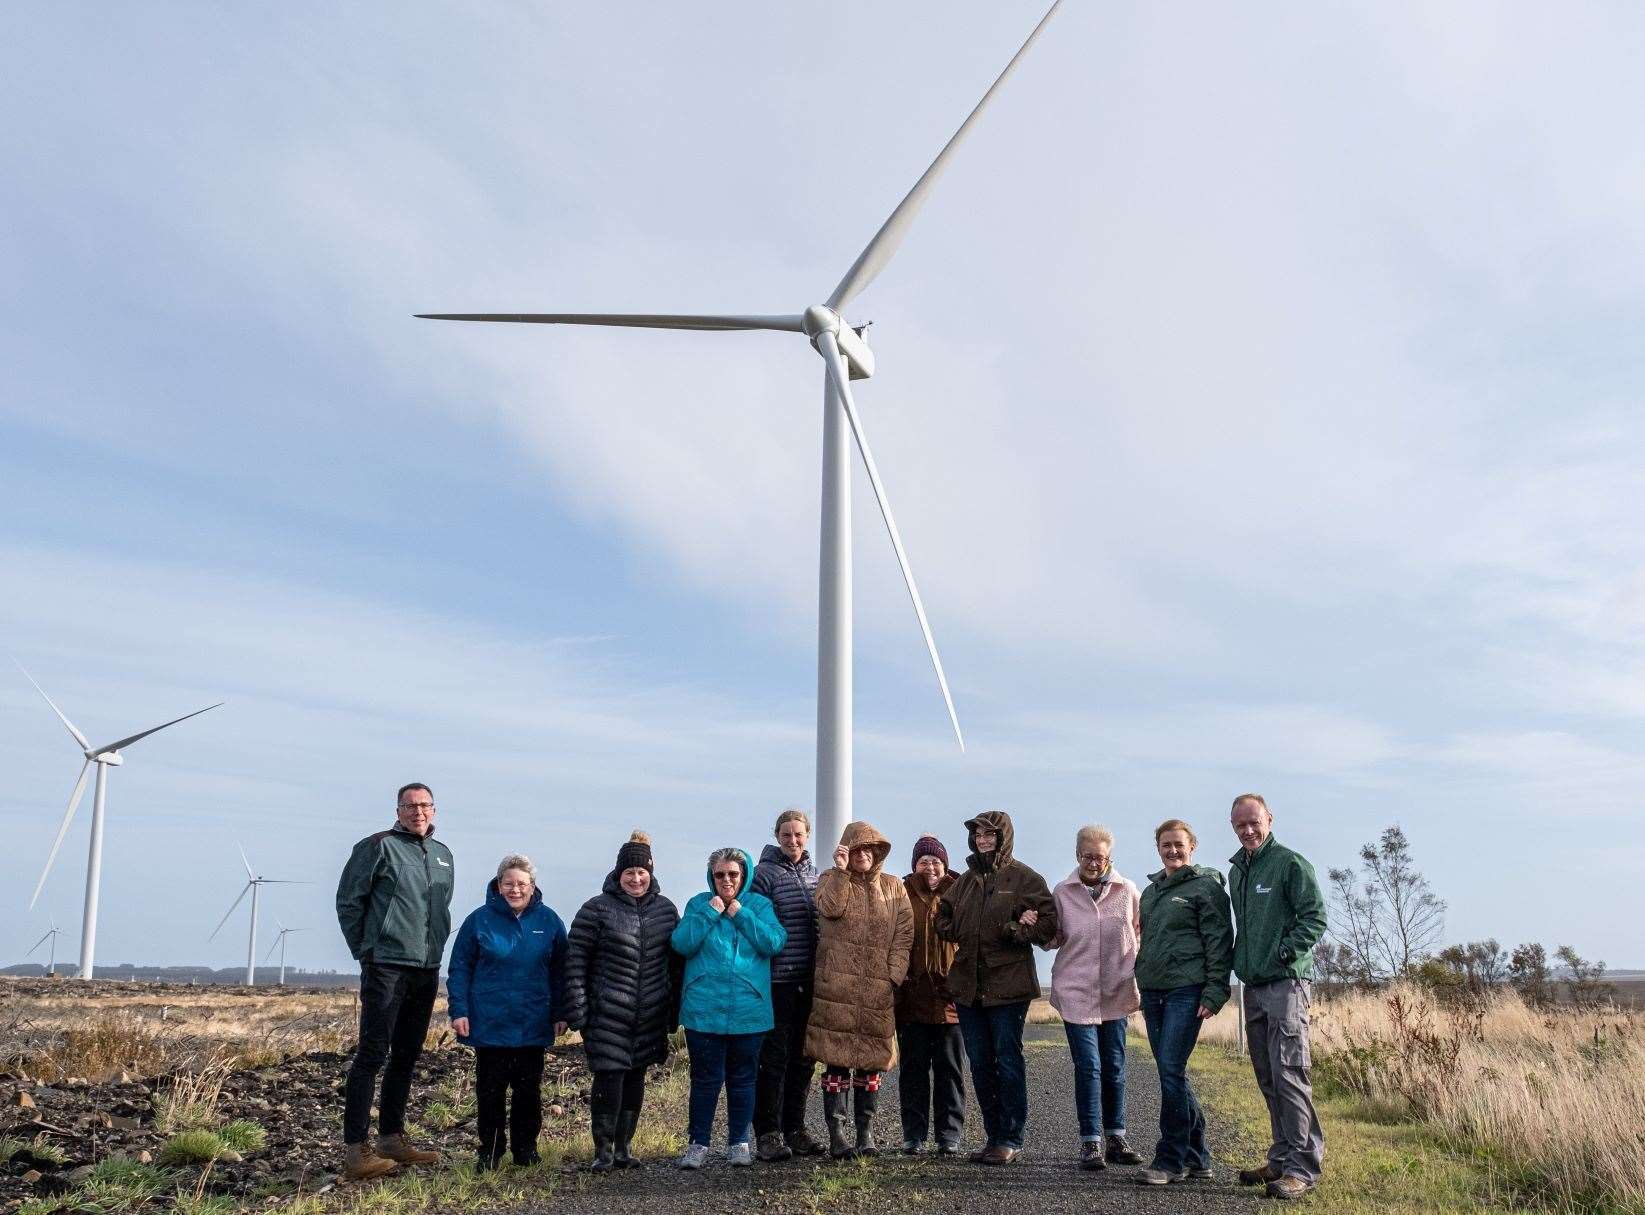 Community representatives from across Caithness joined ScottishPower Renewables at Halsary wind farm to launch the new £3.75 million community benefit fund.